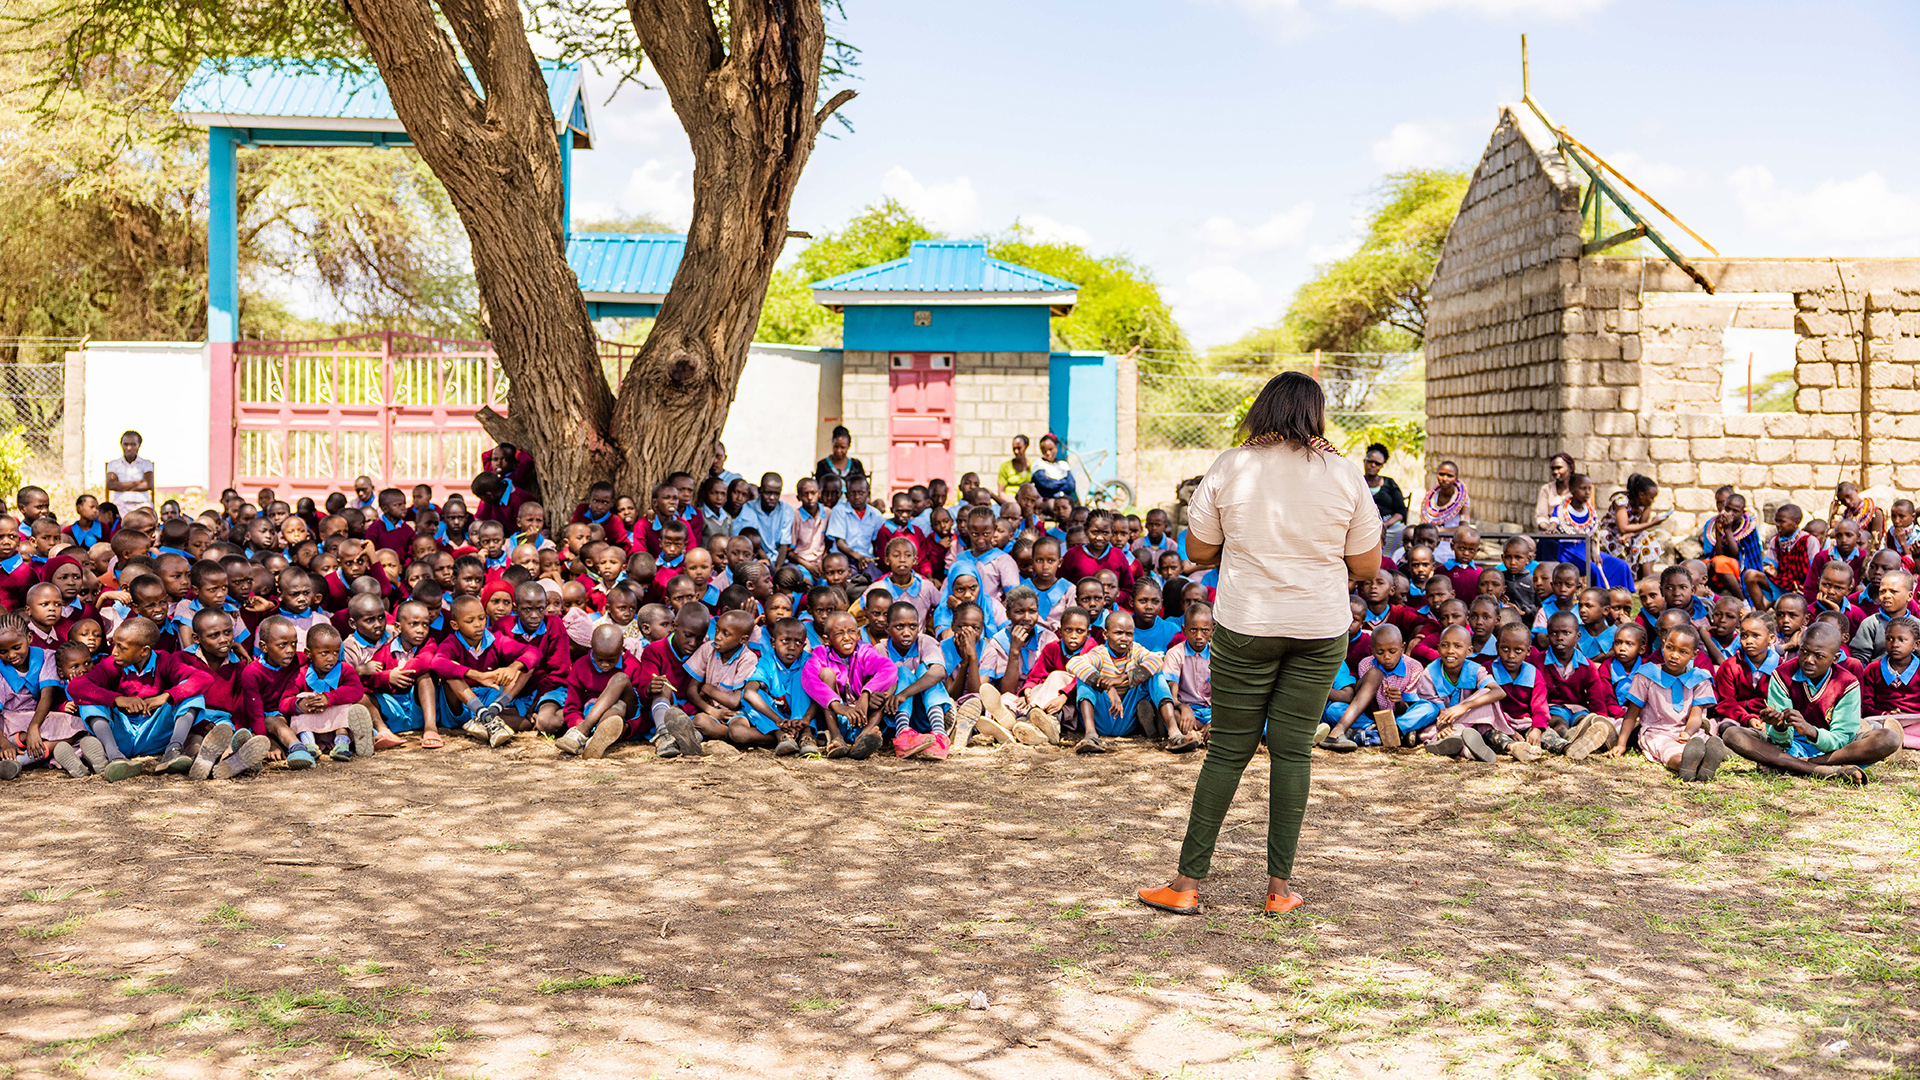 A woman stands with her back to the camera, facing a crowd of dozens of Kenyan school children sitting on the ground